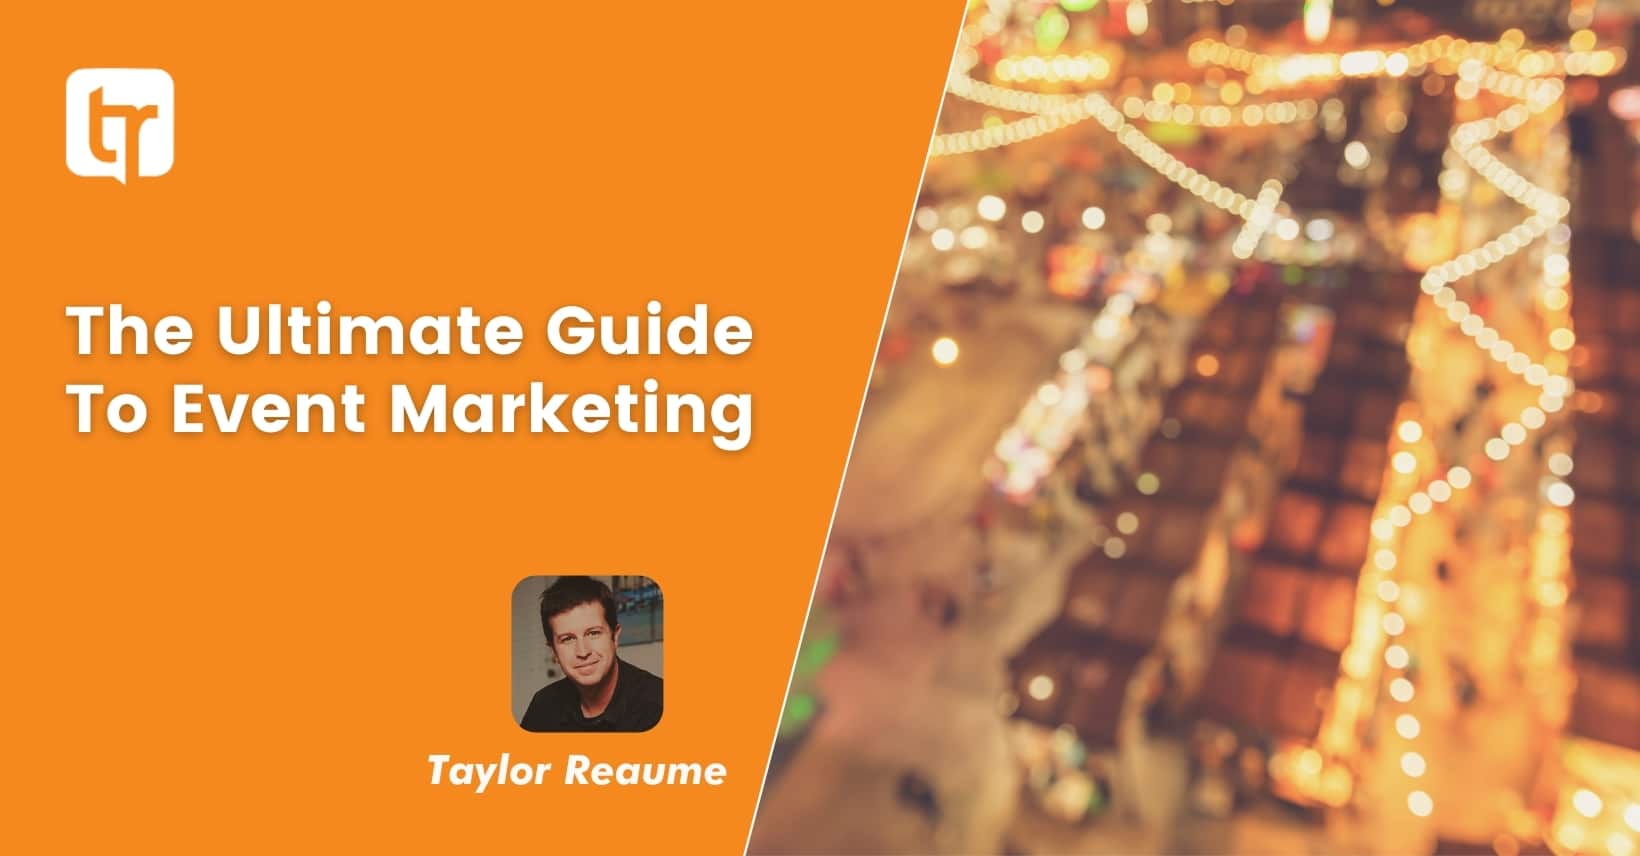 The Ultimate Guide To Event Marketing